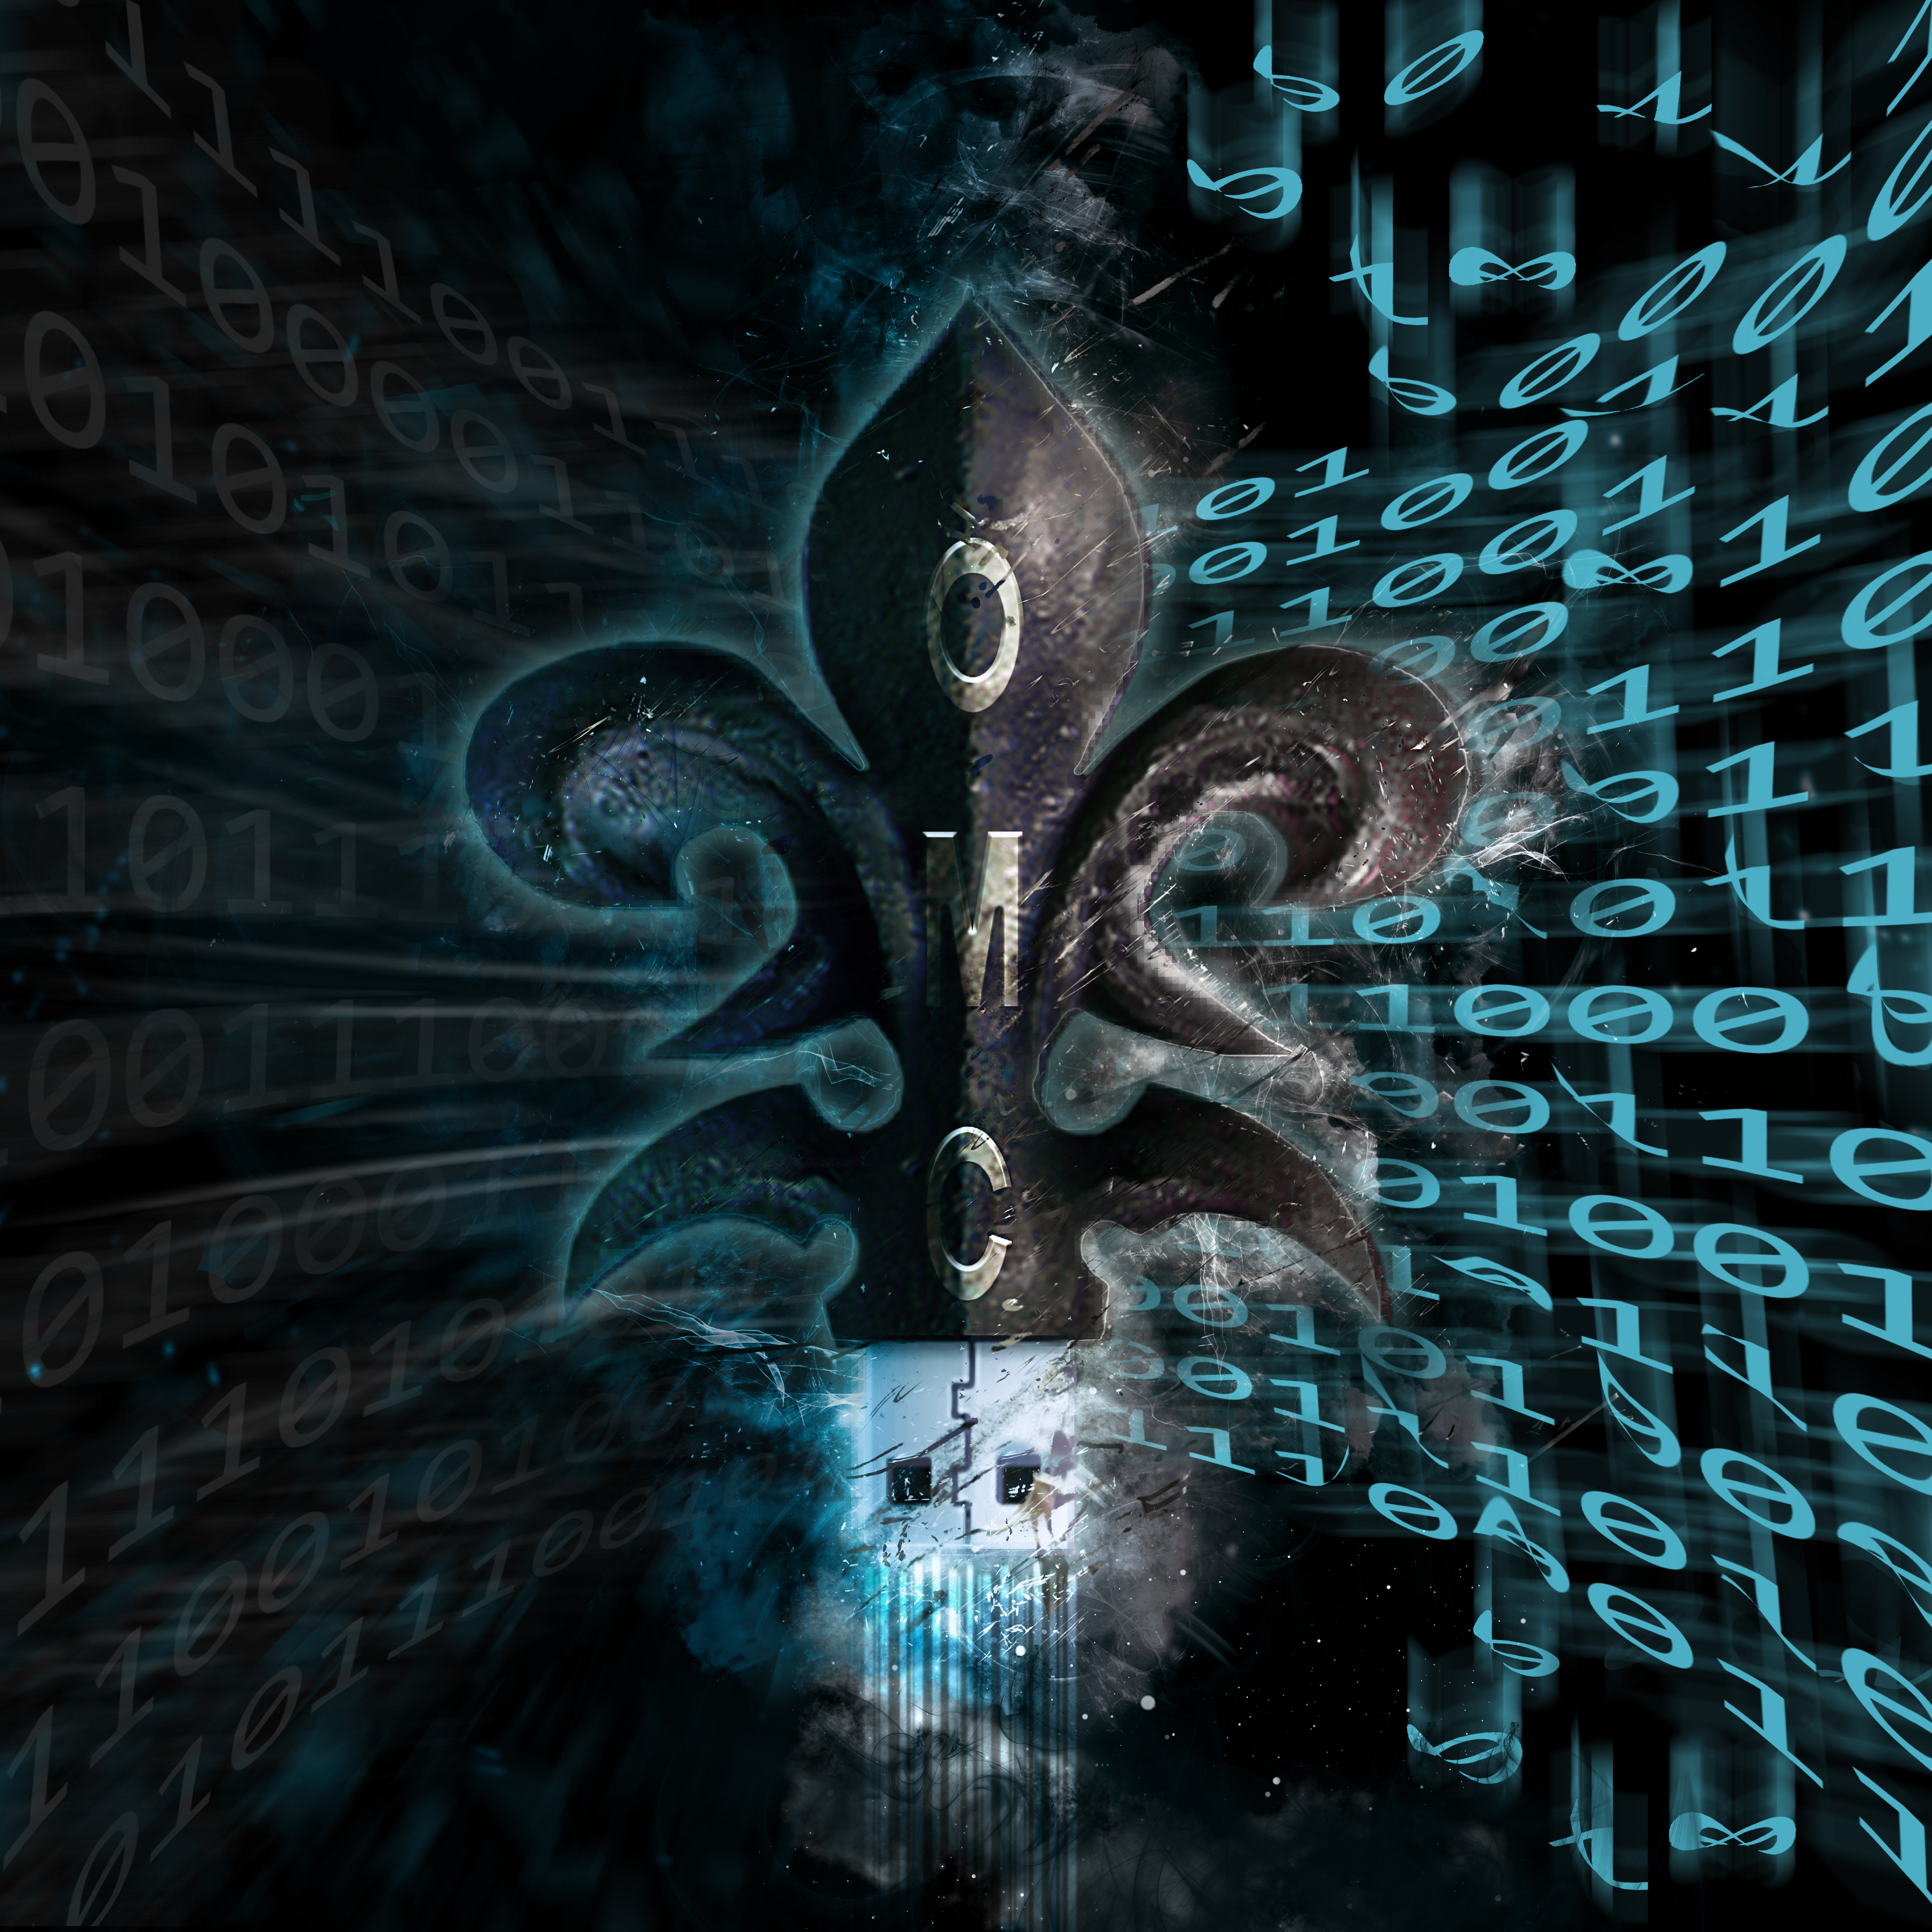 Operation: Mindcrime – The New Reality is the Final Album in Geoff Tate’s Trilogy!